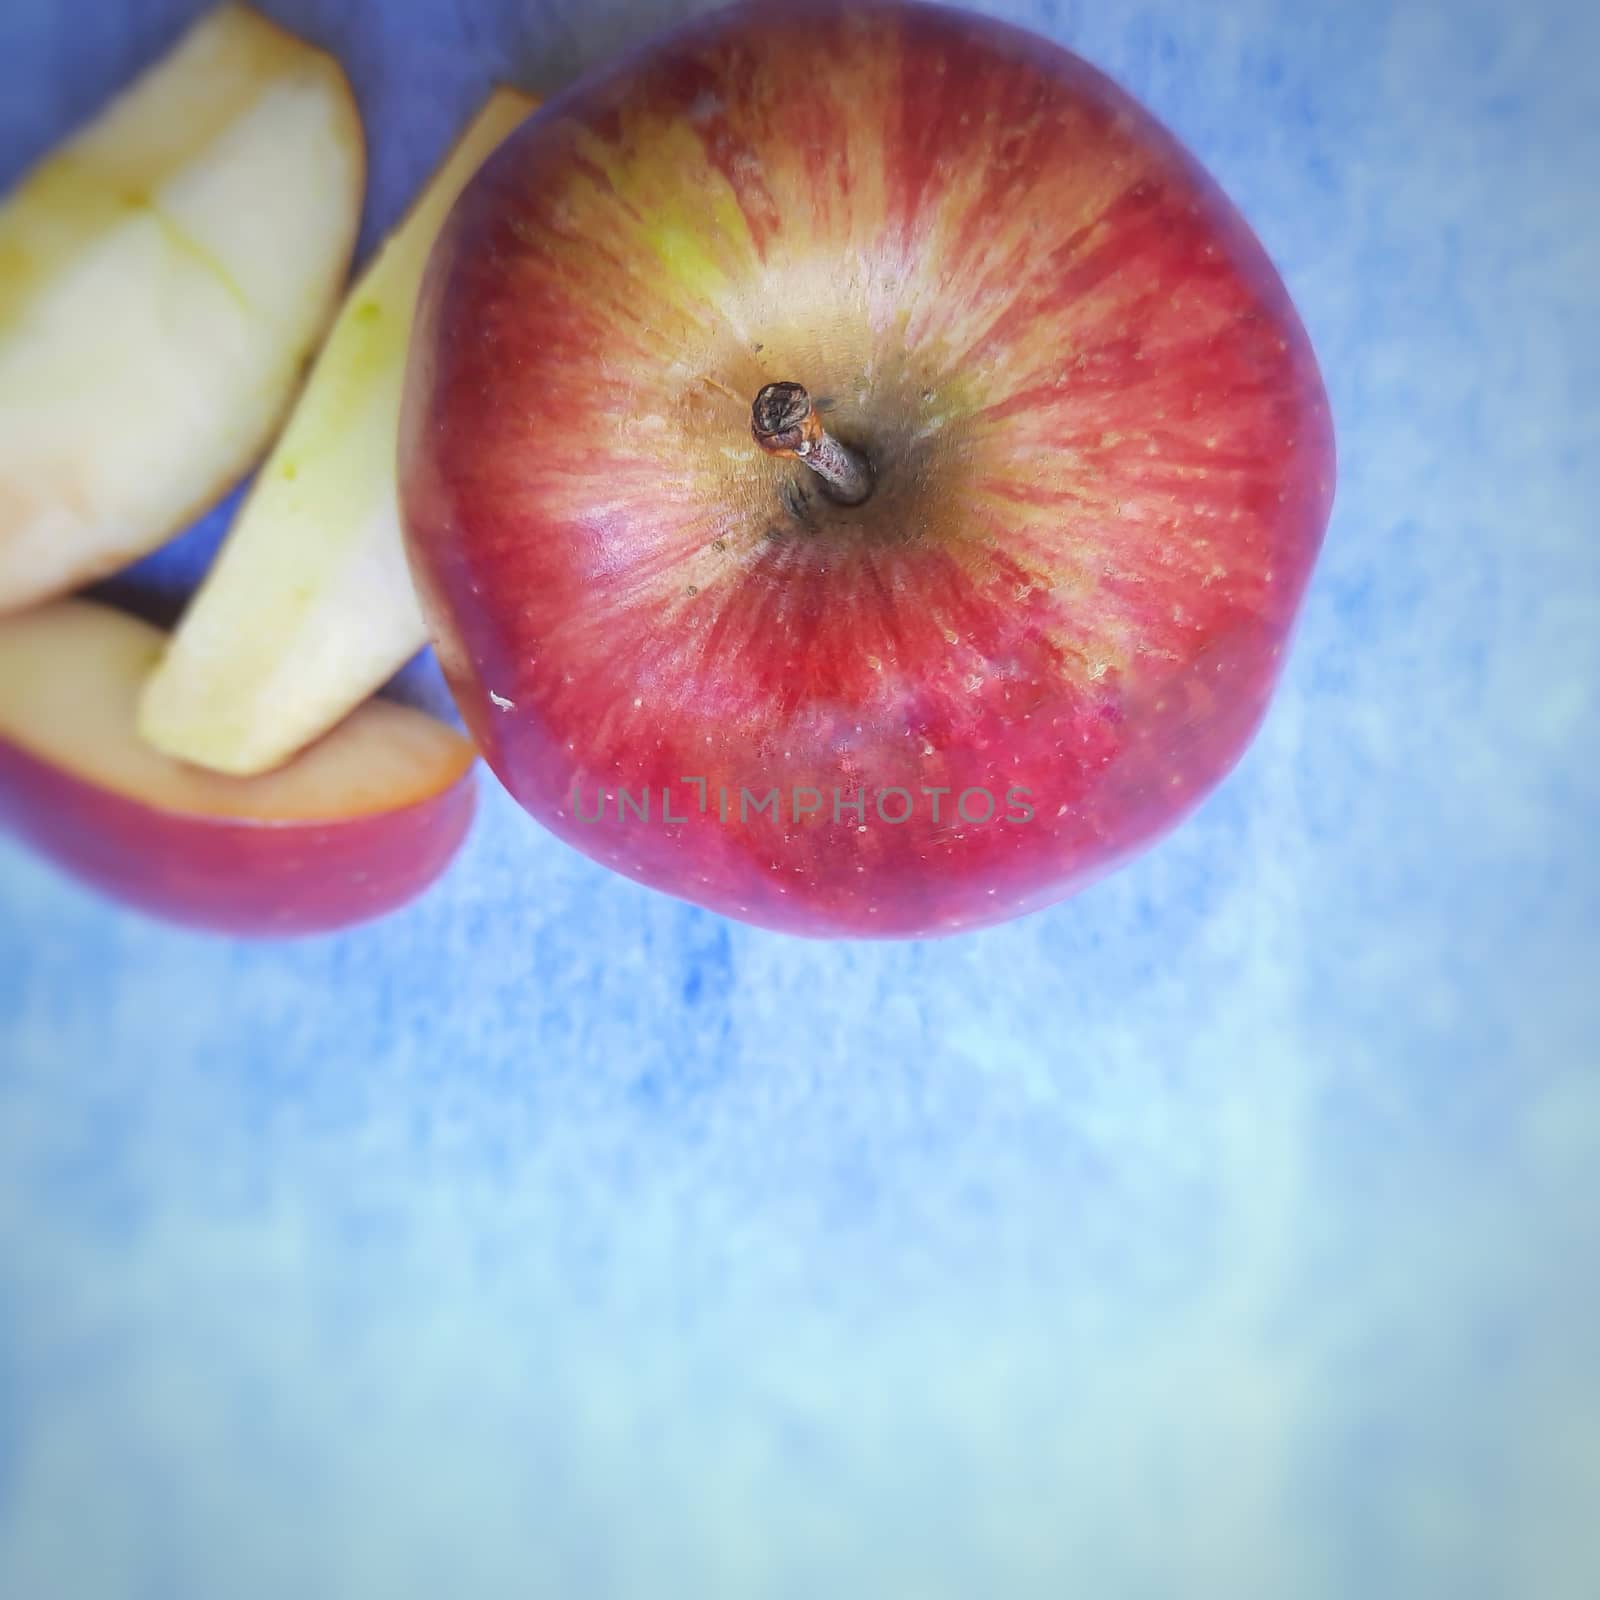 One apple and cut its pieces placed beautifully in white background